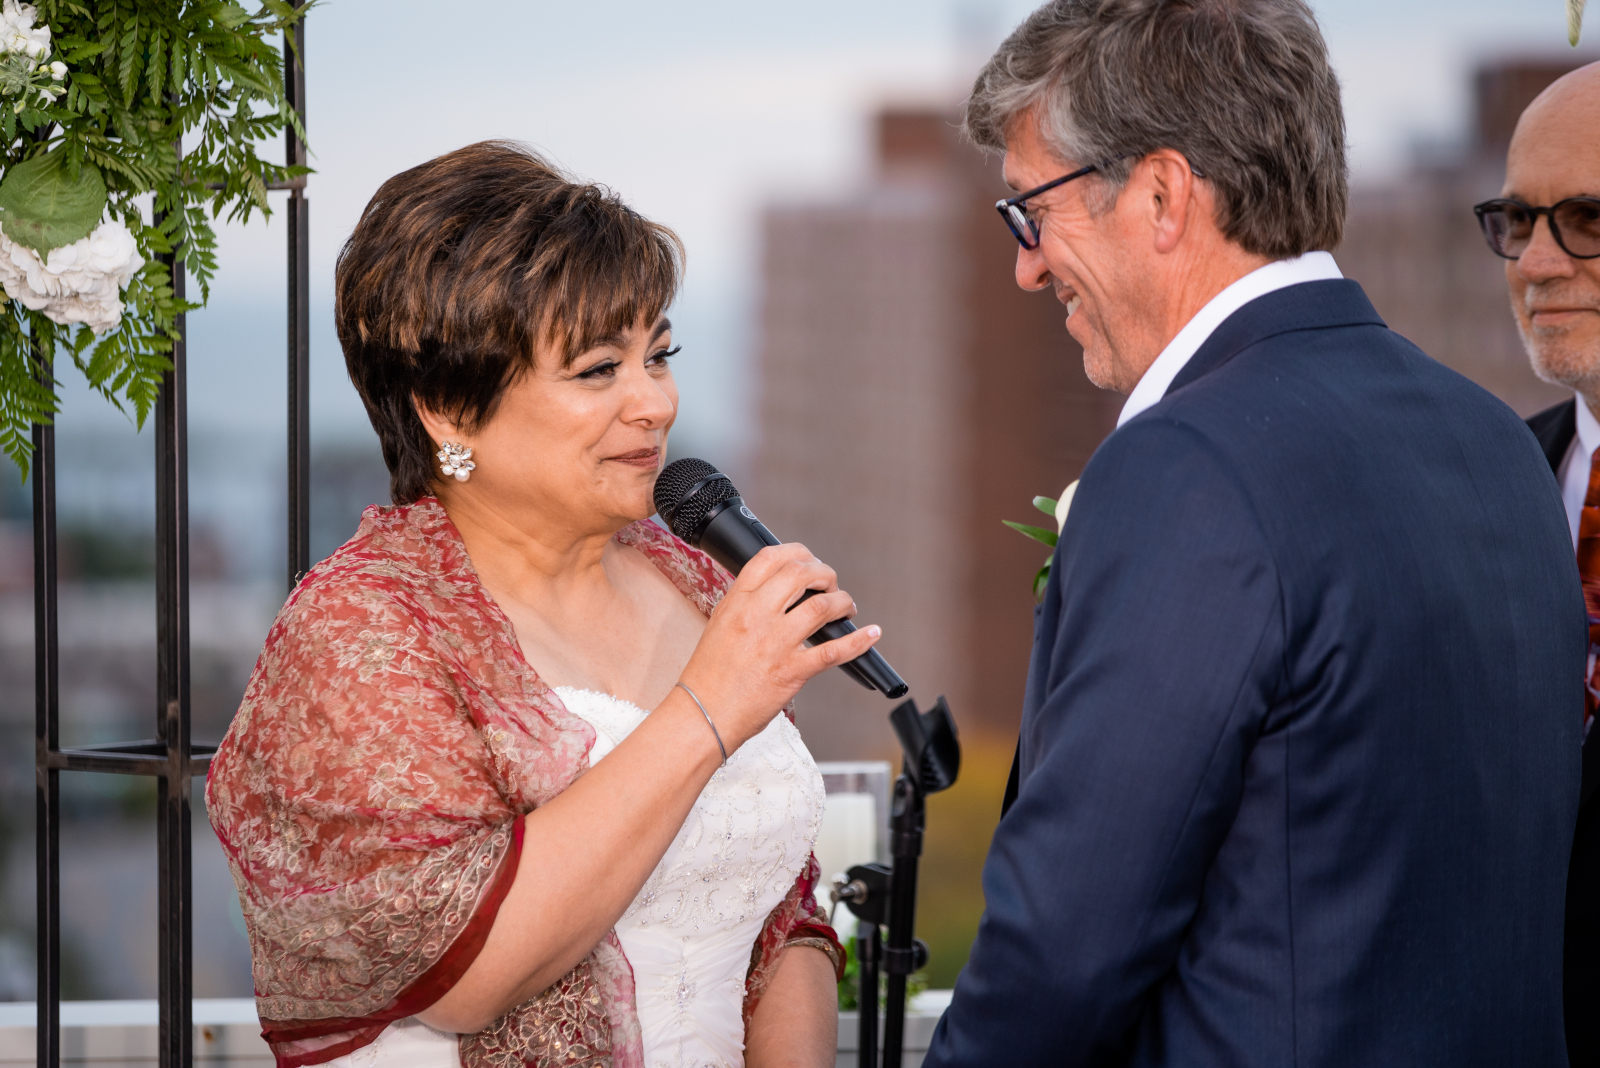 Bride saying vows, smiling, sweet wedding photo, older couple, romantic outdoor urban wedding ceremony at Penthouse Events, Ohio City, Cleveland Flats